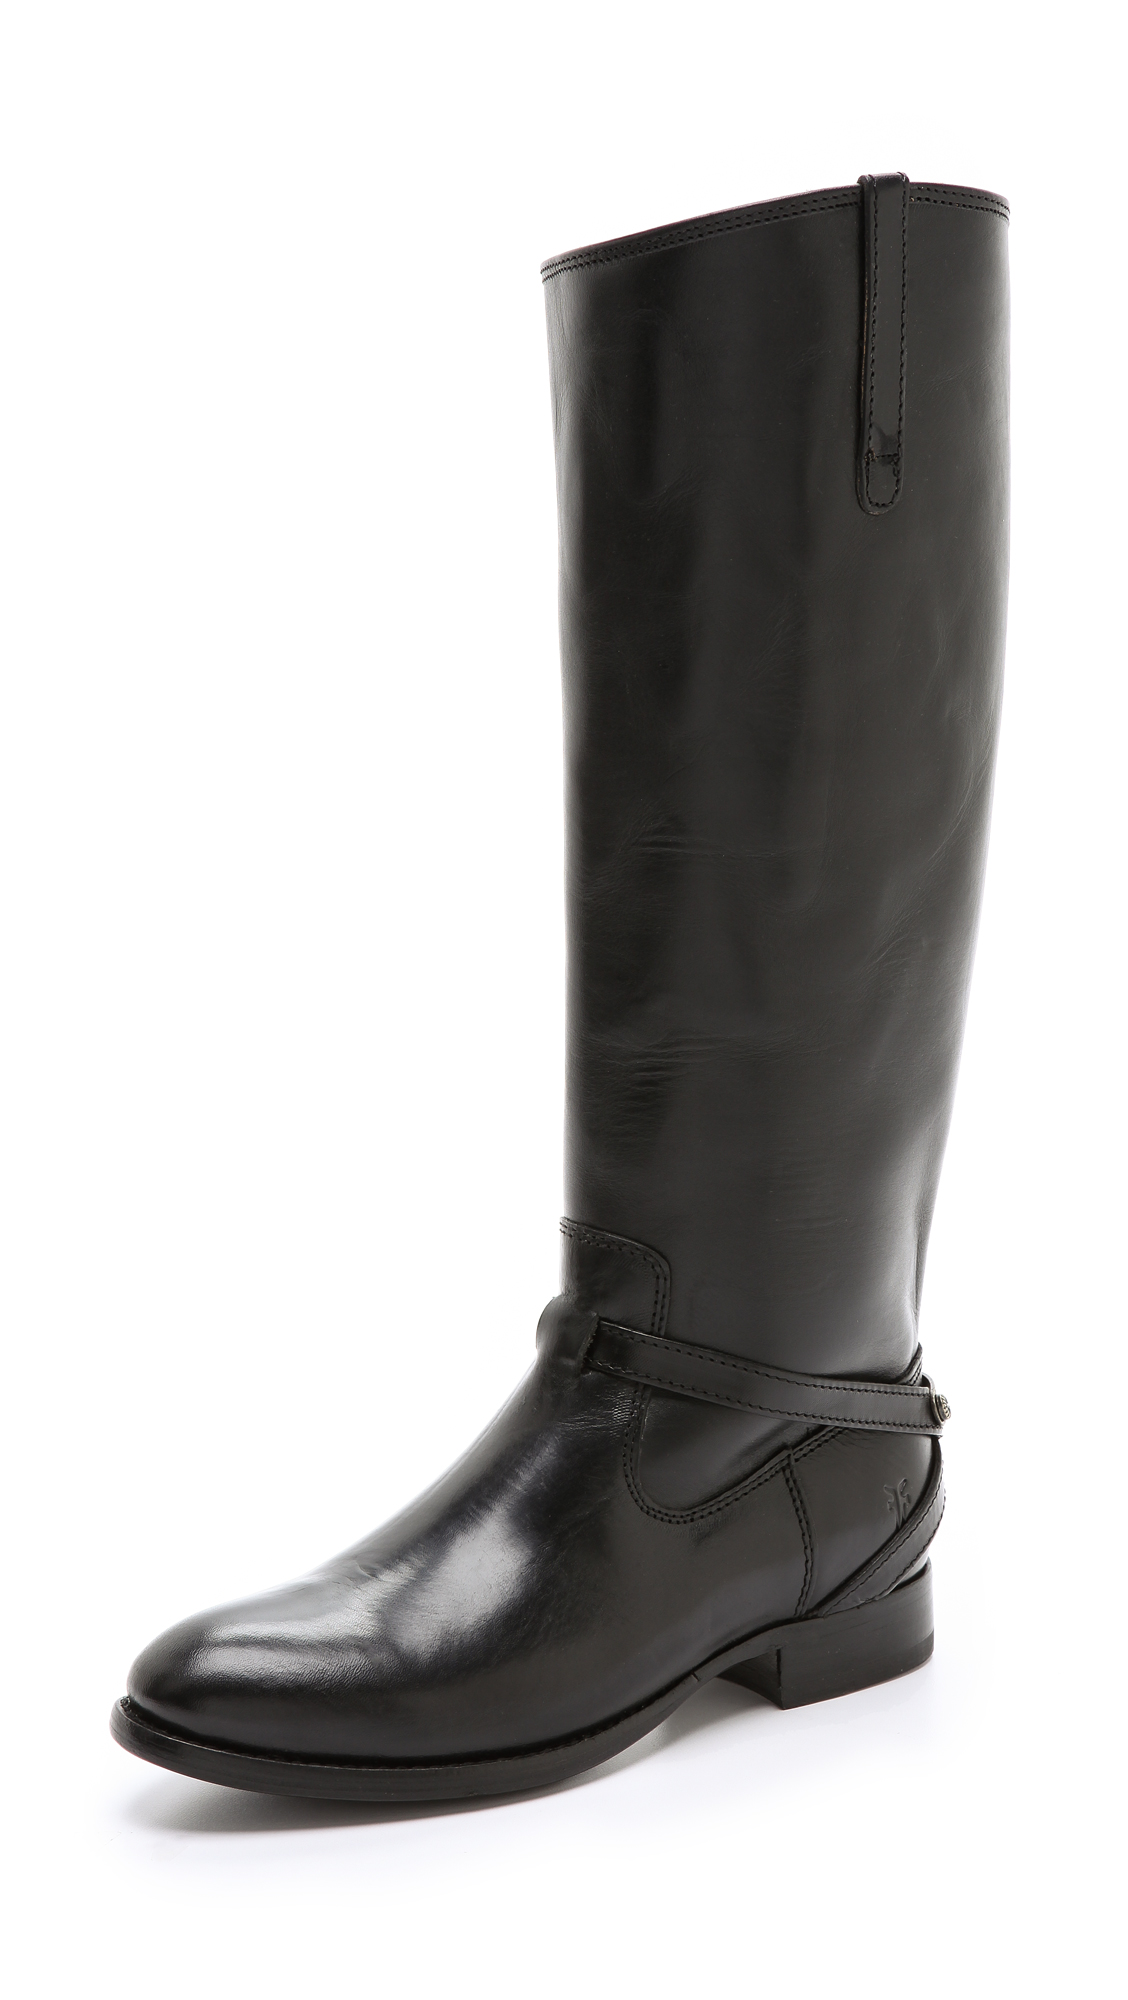 Lyst - Frye Lindsay Plate Boots in Black